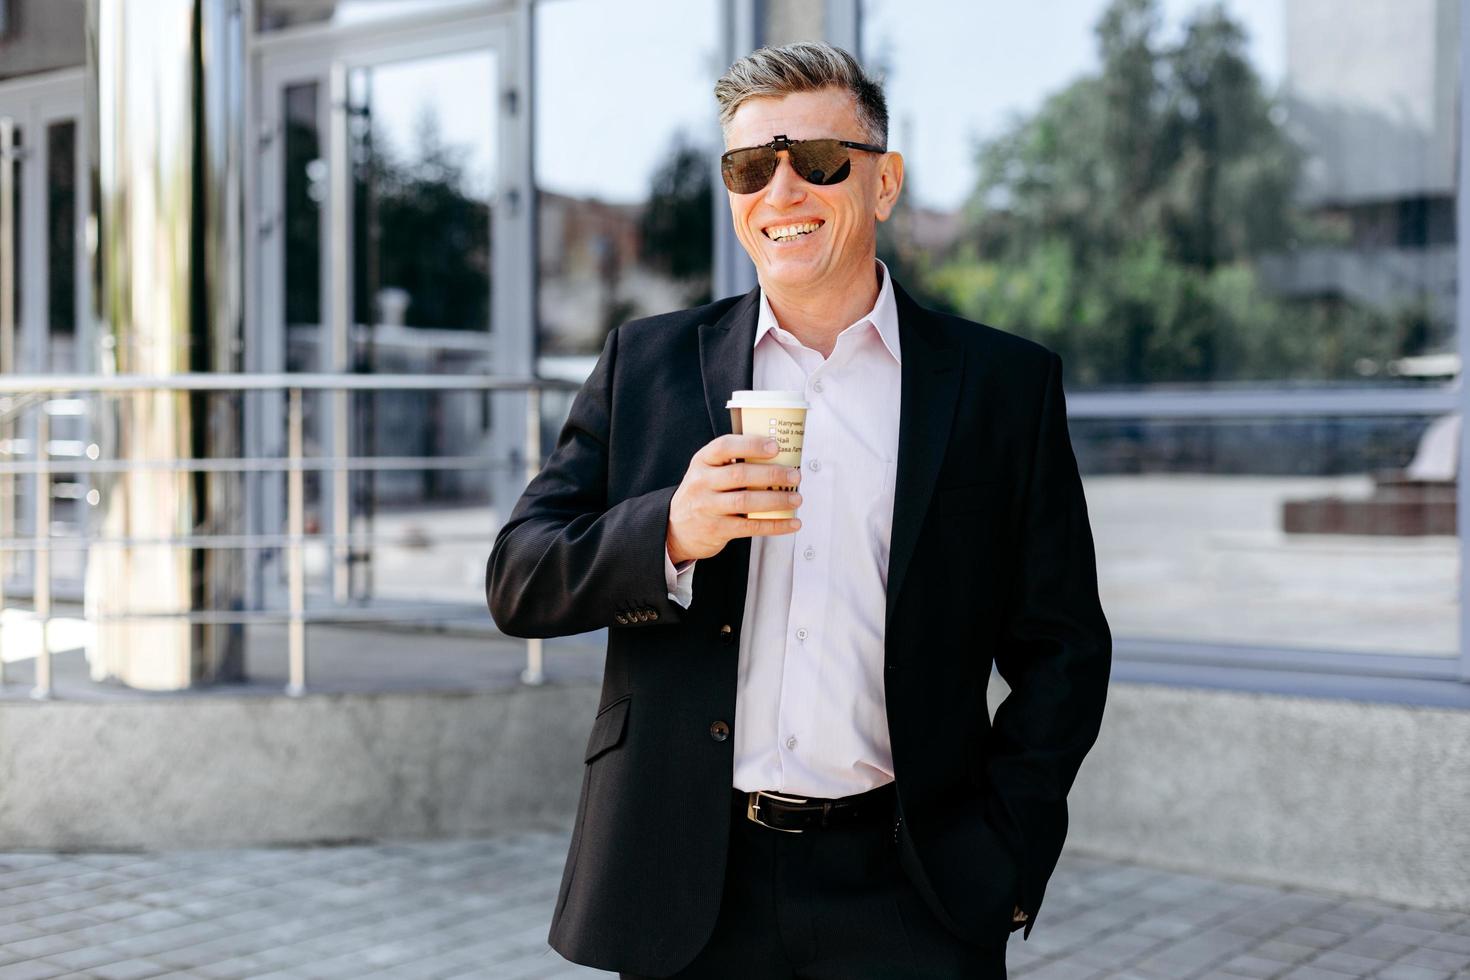 Portrait of  senior businessman standing on pavement holding a cup of coffee and smiling . - Image photo